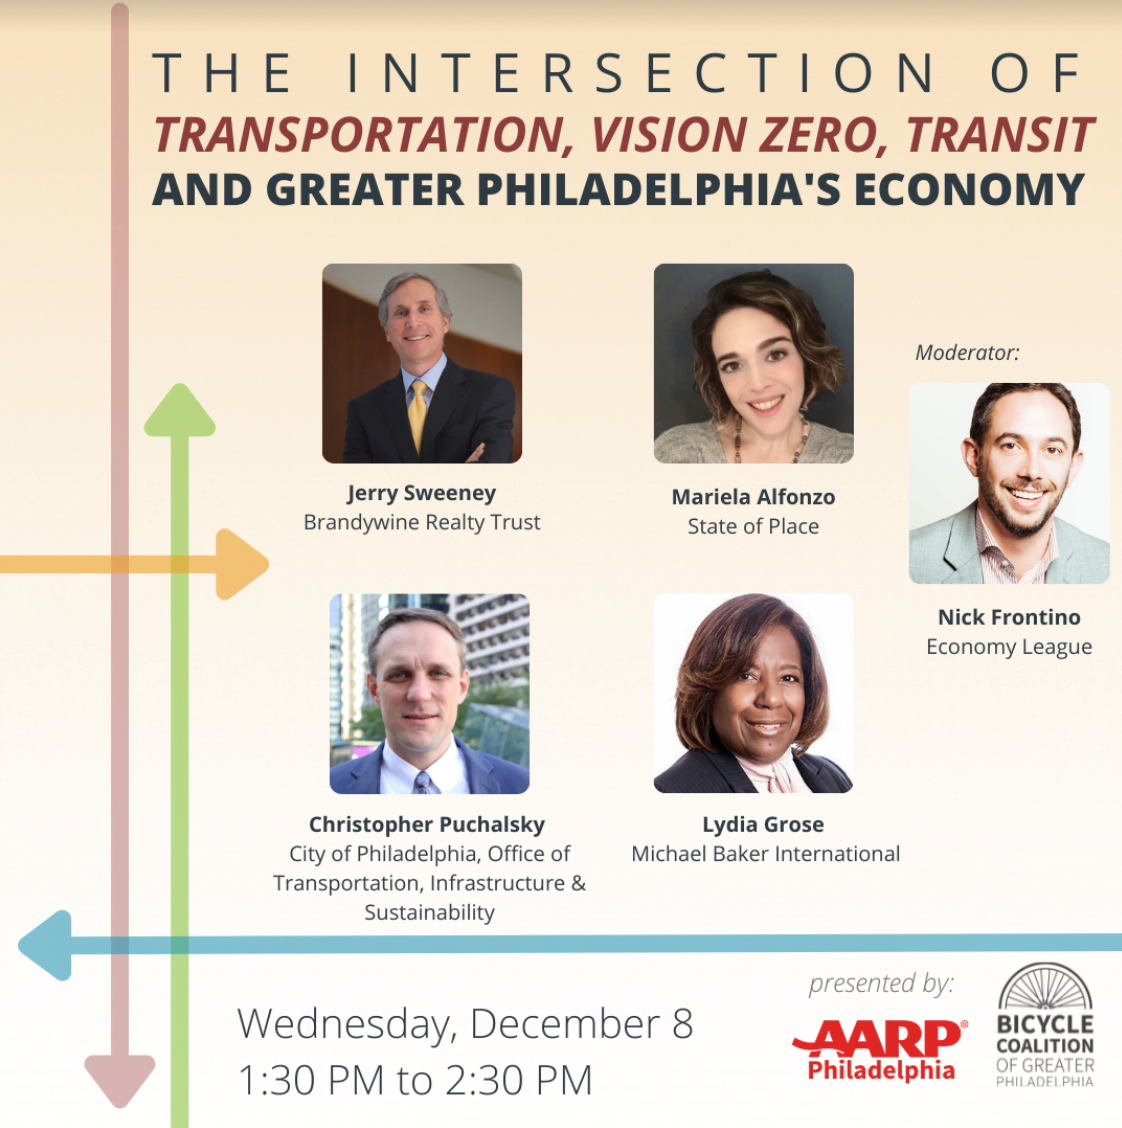 The Intersection of Transportation, Vision Zero, Transit and Greater Philadelphia's Economy flyer with five headshots of speakers on a light orange background